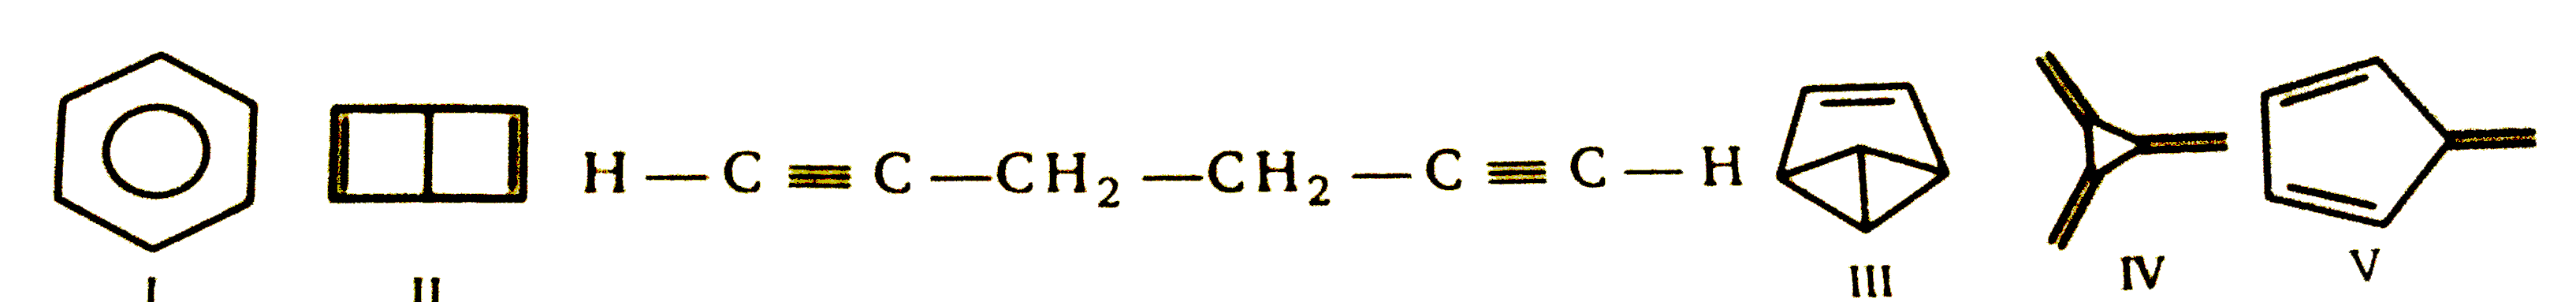 Which of the following C(6)H(6) compounds has a single set of structurally equivalent hydrogen atoms ?   (I)